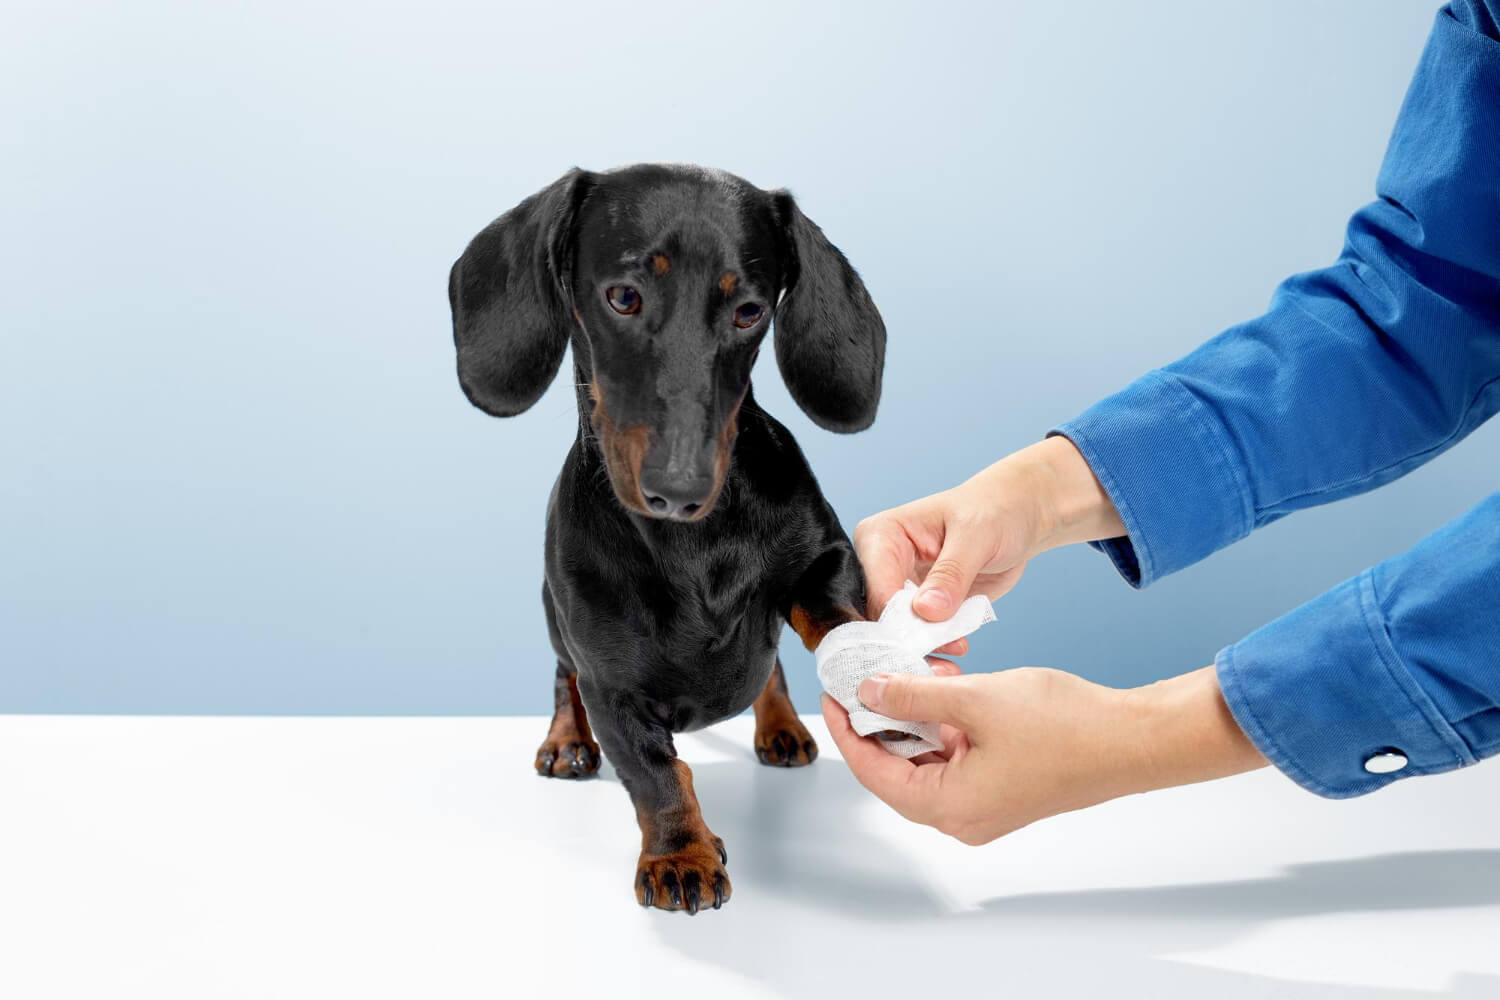 Dog Wound Care Tips For Pet Parents in India